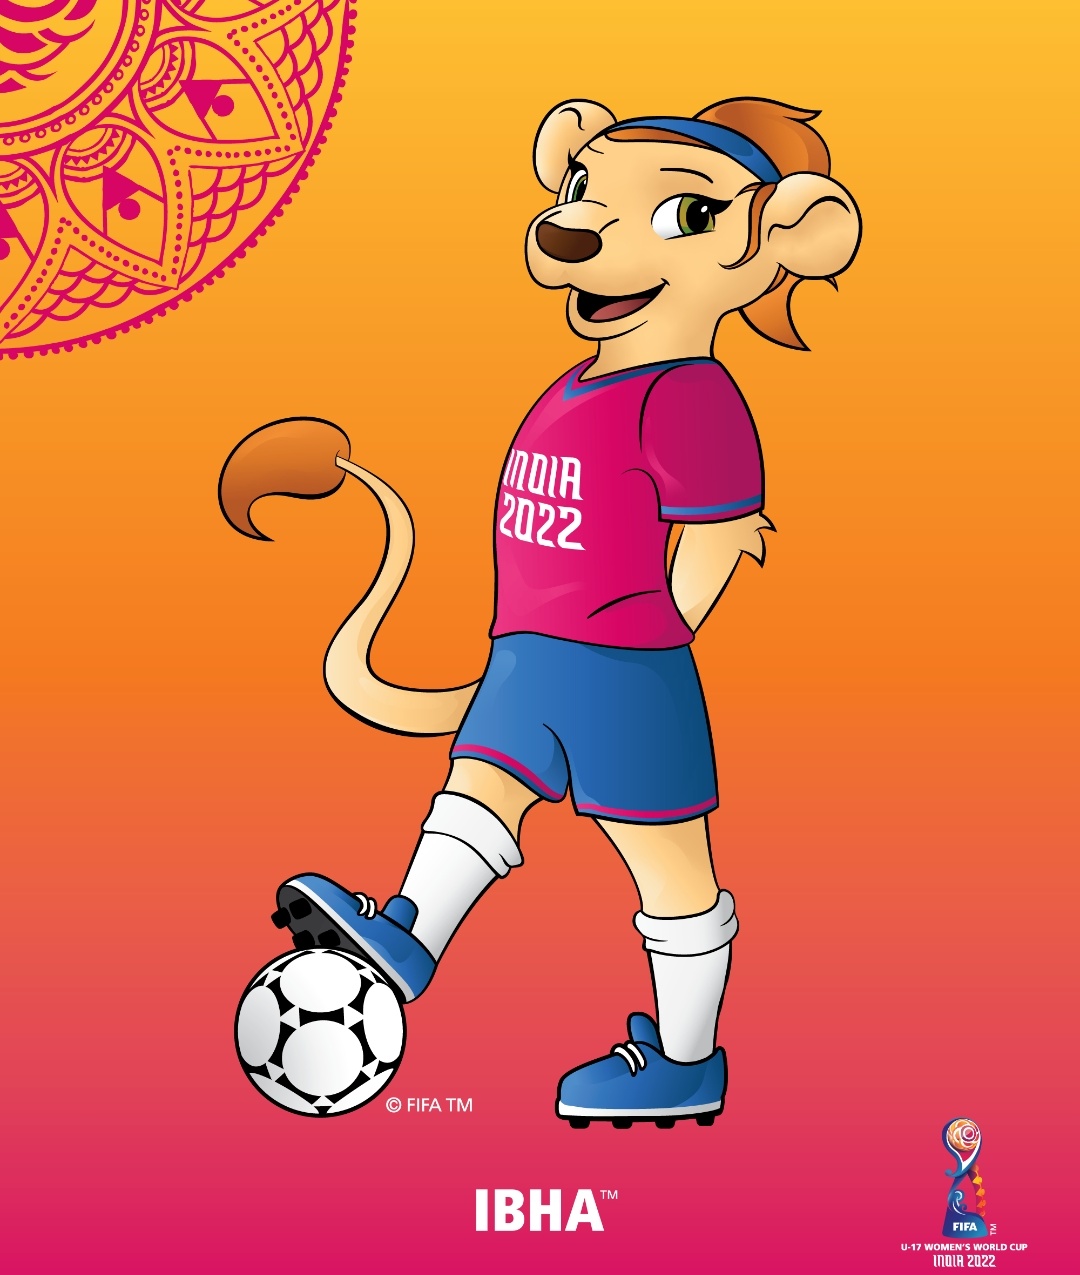 Official Mascot revealed for FIFA U17 Women’s World Cup India 2022